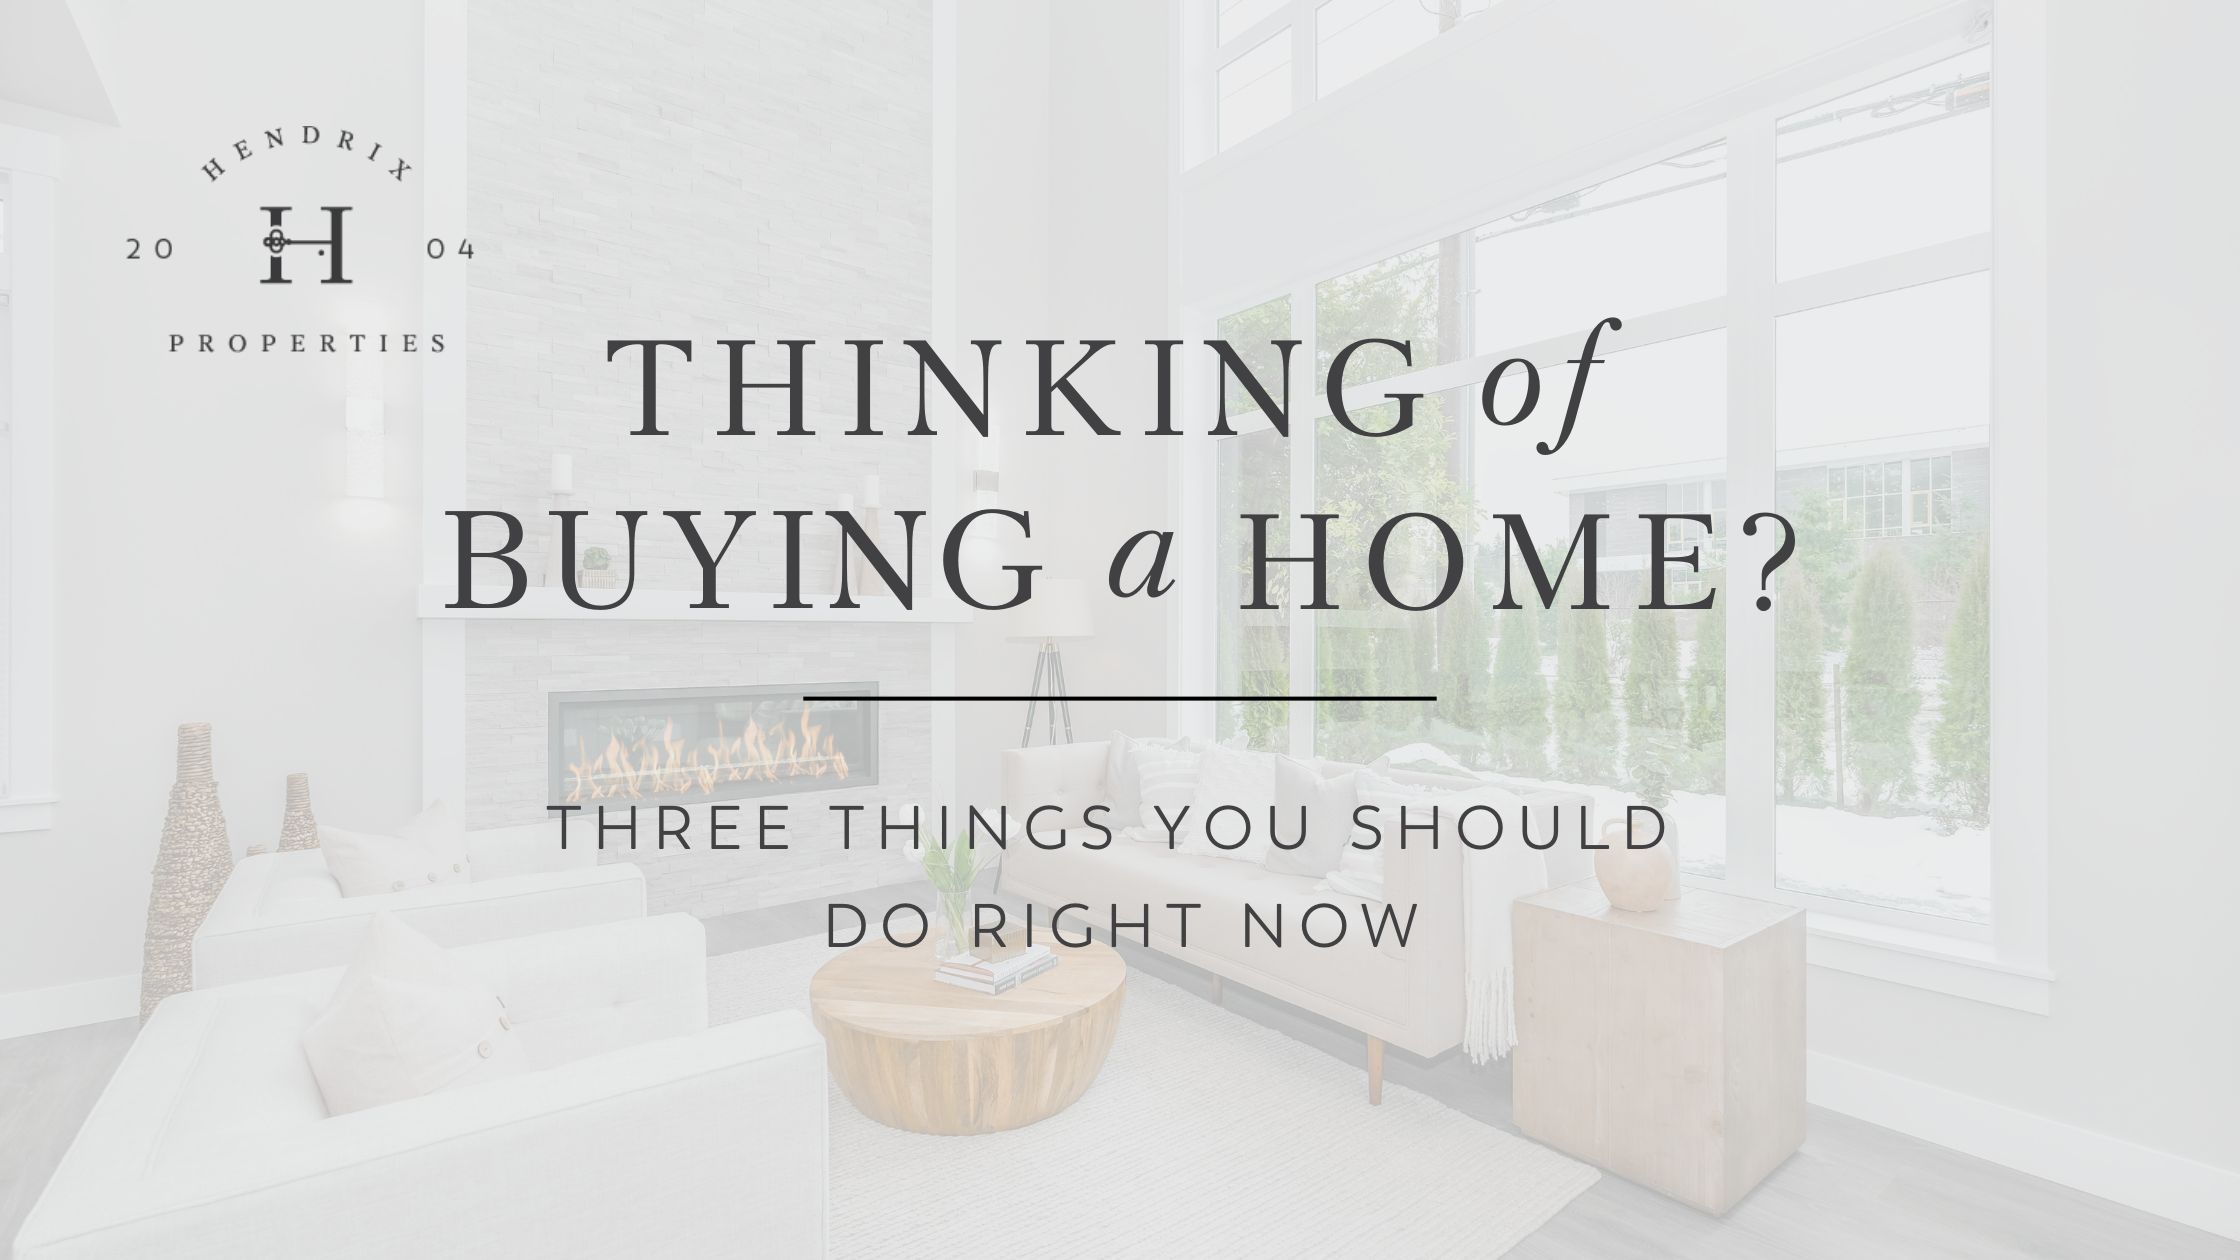 3 Things to do now if thinking of buying a home